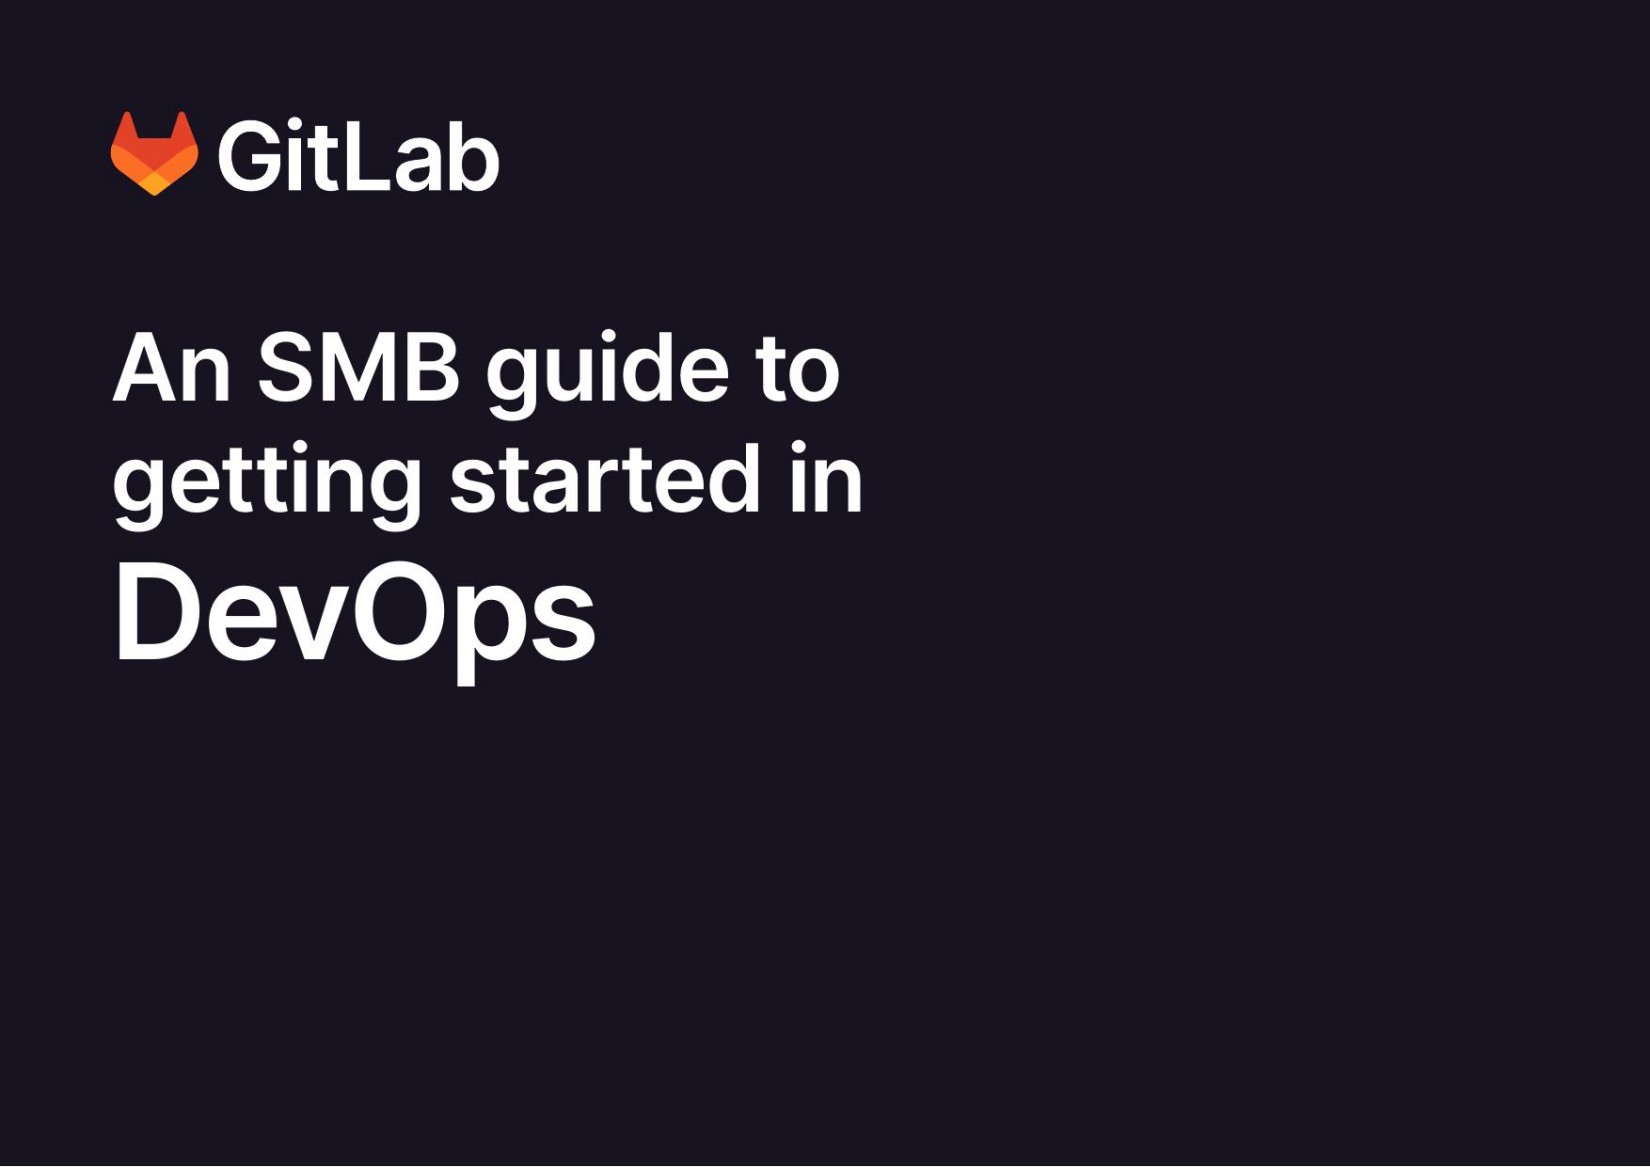 An SMB guid to getting started in DevOps